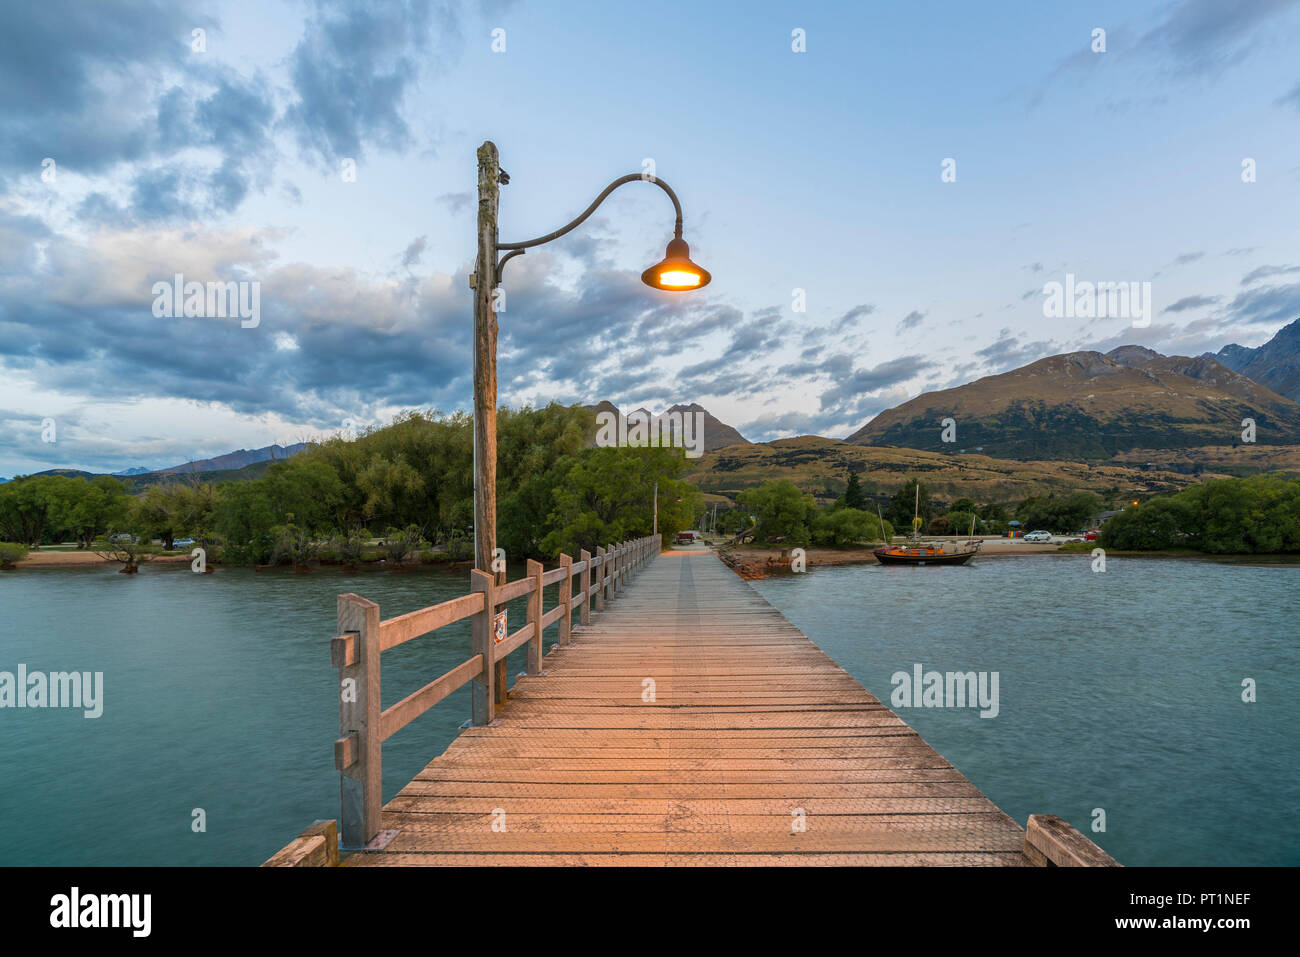 The jetty with lamp post at dusk, Glenorchy, Queenstown Lake district, Otago region, South Island, New Zealand, Stock Photo